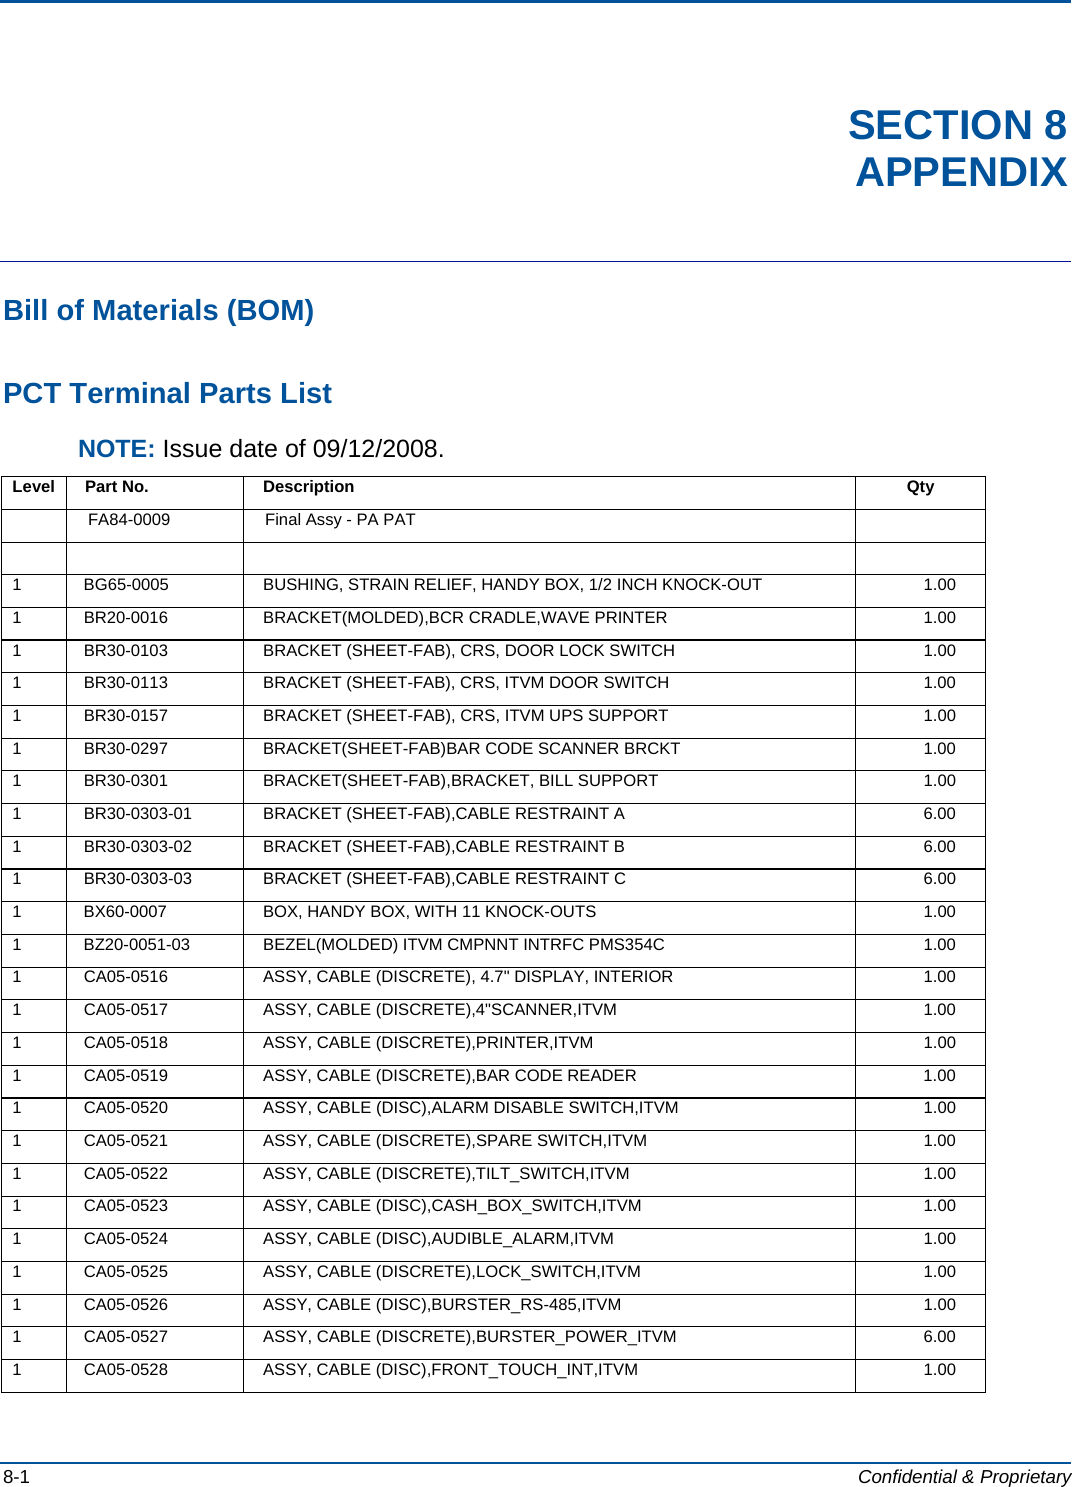  8-1  Confidential &amp; Proprietary SECTION 8 APPENDIX Bill of Materials (BOM) PCT Terminal Parts List NOTE: Issue date of 09/12/2008. Level Part No.  Description  Qty   FA84-0009  Final Assy - PA PAT         1  BG65-0005  BUSHING, STRAIN RELIEF, HANDY BOX, 1/2 INCH KNOCK-OUT  1.00 1 BR20-0016  BRACKET(MOLDED),BCR CRADLE,WAVE PRINTER  1.00 1  BR30-0103  BRACKET (SHEET-FAB), CRS, DOOR LOCK SWITCH  1.00 1 BR30-0113  BRACKET (SHEET-FAB), CRS, ITVM DOOR SWITCH  1.00 1  BR30-0157  BRACKET (SHEET-FAB), CRS, ITVM UPS SUPPORT  1.00 1 BR30-0297  BRACKET(SHEET-FAB)BAR CODE SCANNER BRCKT  1.00 1 BR30-0301  BRACKET(SHEET-FAB),BRACKET, BILL SUPPORT  1.00 1  BR30-0303-01  BRACKET (SHEET-FAB),CABLE RESTRAINT A  6.00 1  BR30-0303-02  BRACKET (SHEET-FAB),CABLE RESTRAINT B  6.00 1 BR30-0303-03  BRACKET (SHEET-FAB),CABLE RESTRAINT C  6.00 1  BX60-0007  BOX, HANDY BOX, WITH 11 KNOCK-OUTS  1.00 1  BZ20-0051-03  BEZEL(MOLDED) ITVM CMPNNT INTRFC PMS354C  1.00 1  CA05-0516  ASSY, CABLE (DISCRETE), 4.7&quot; DISPLAY, INTERIOR  1.00 1  CA05-0517  ASSY, CABLE (DISCRETE),4&quot;SCANNER,ITVM  1.00 1  CA05-0518  ASSY, CABLE (DISCRETE),PRINTER,ITVM  1.00 1  CA05-0519  ASSY, CABLE (DISCRETE),BAR CODE READER  1.00 1  CA05-0520  ASSY, CABLE (DISC),ALARM DISABLE SWITCH,ITVM  1.00 1  CA05-0521  ASSY, CABLE (DISCRETE),SPARE SWITCH,ITVM  1.00 1  CA05-0522  ASSY, CABLE (DISCRETE),TILT_SWITCH,ITVM  1.00 1  CA05-0523  ASSY, CABLE (DISC),CASH_BOX_SWITCH,ITVM  1.00 1  CA05-0524  ASSY, CABLE (DISC),AUDIBLE_ALARM,ITVM  1.00 1  CA05-0525  ASSY, CABLE (DISCRETE),LOCK_SWITCH,ITVM  1.00 1  CA05-0526  ASSY, CABLE (DISC),BURSTER_RS-485,ITVM  1.00 1  CA05-0527  ASSY, CABLE (DISCRETE),BURSTER_POWER_ITVM  6.00 1  CA05-0528  ASSY, CABLE (DISC),FRONT_TOUCH_INT,ITVM  1.00 